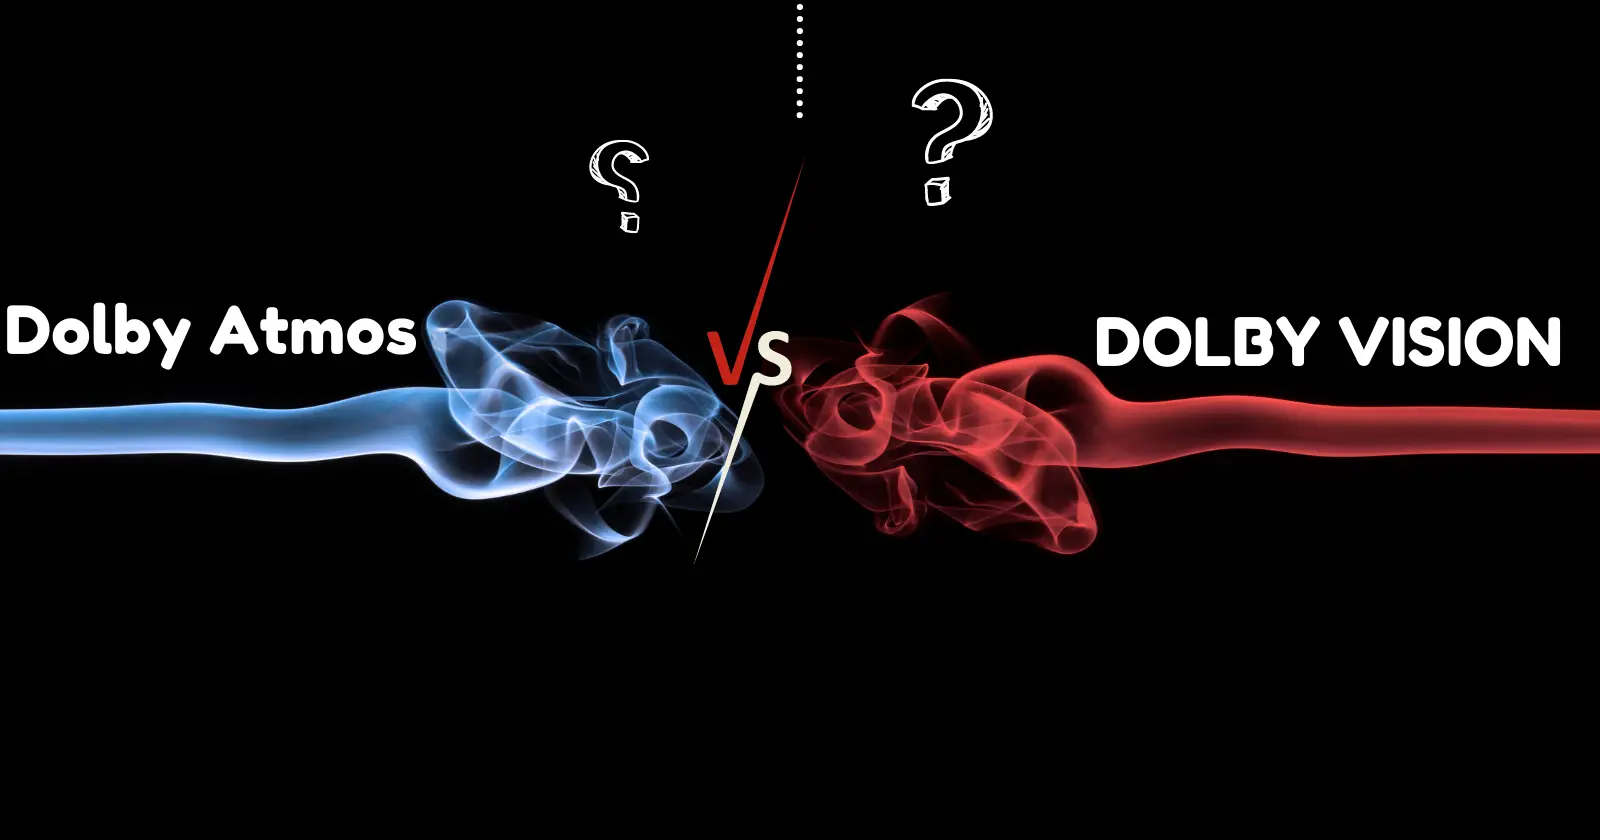 Dolby Atmos Vs Dolby Vision: Key difference, which is better?